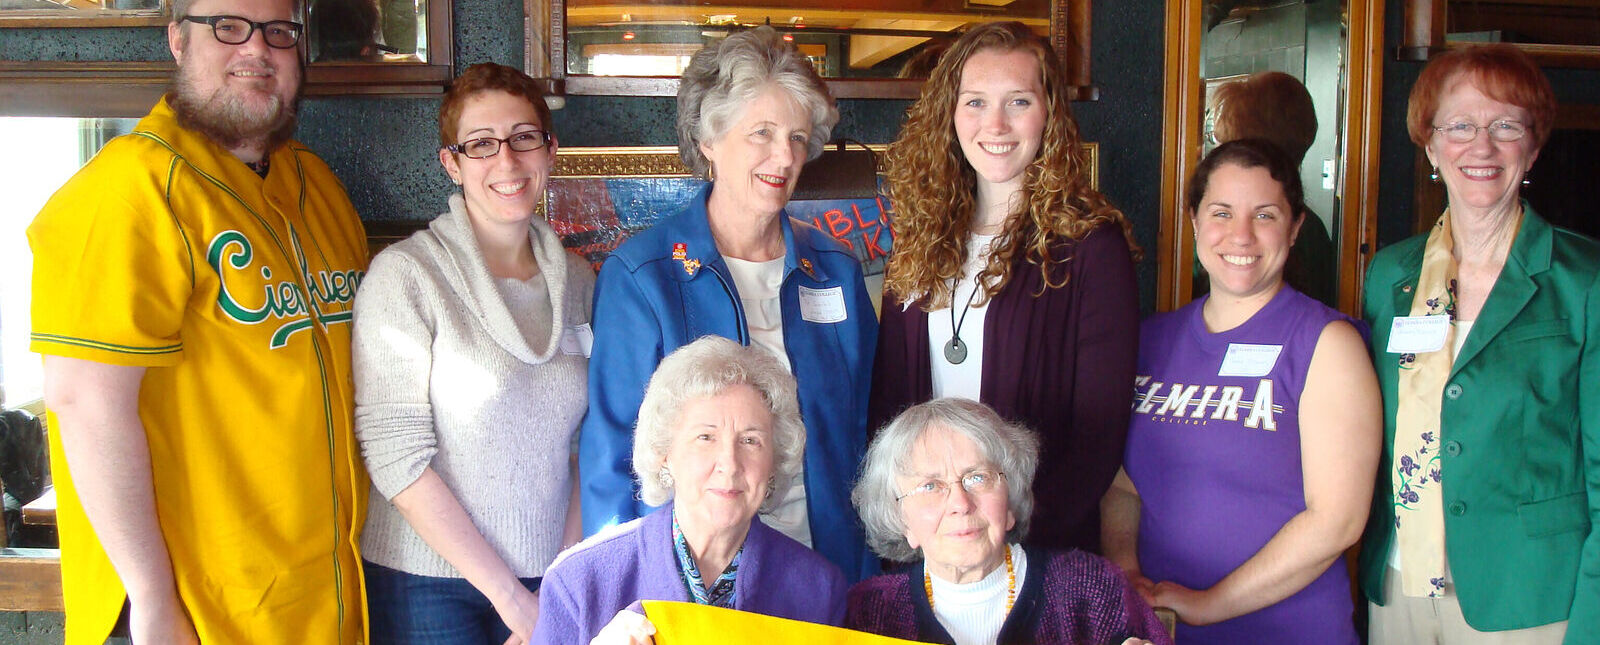 A group of Elmira College alumni from the Seattle area are pictured with a purple and gold EC banner during an alumni event